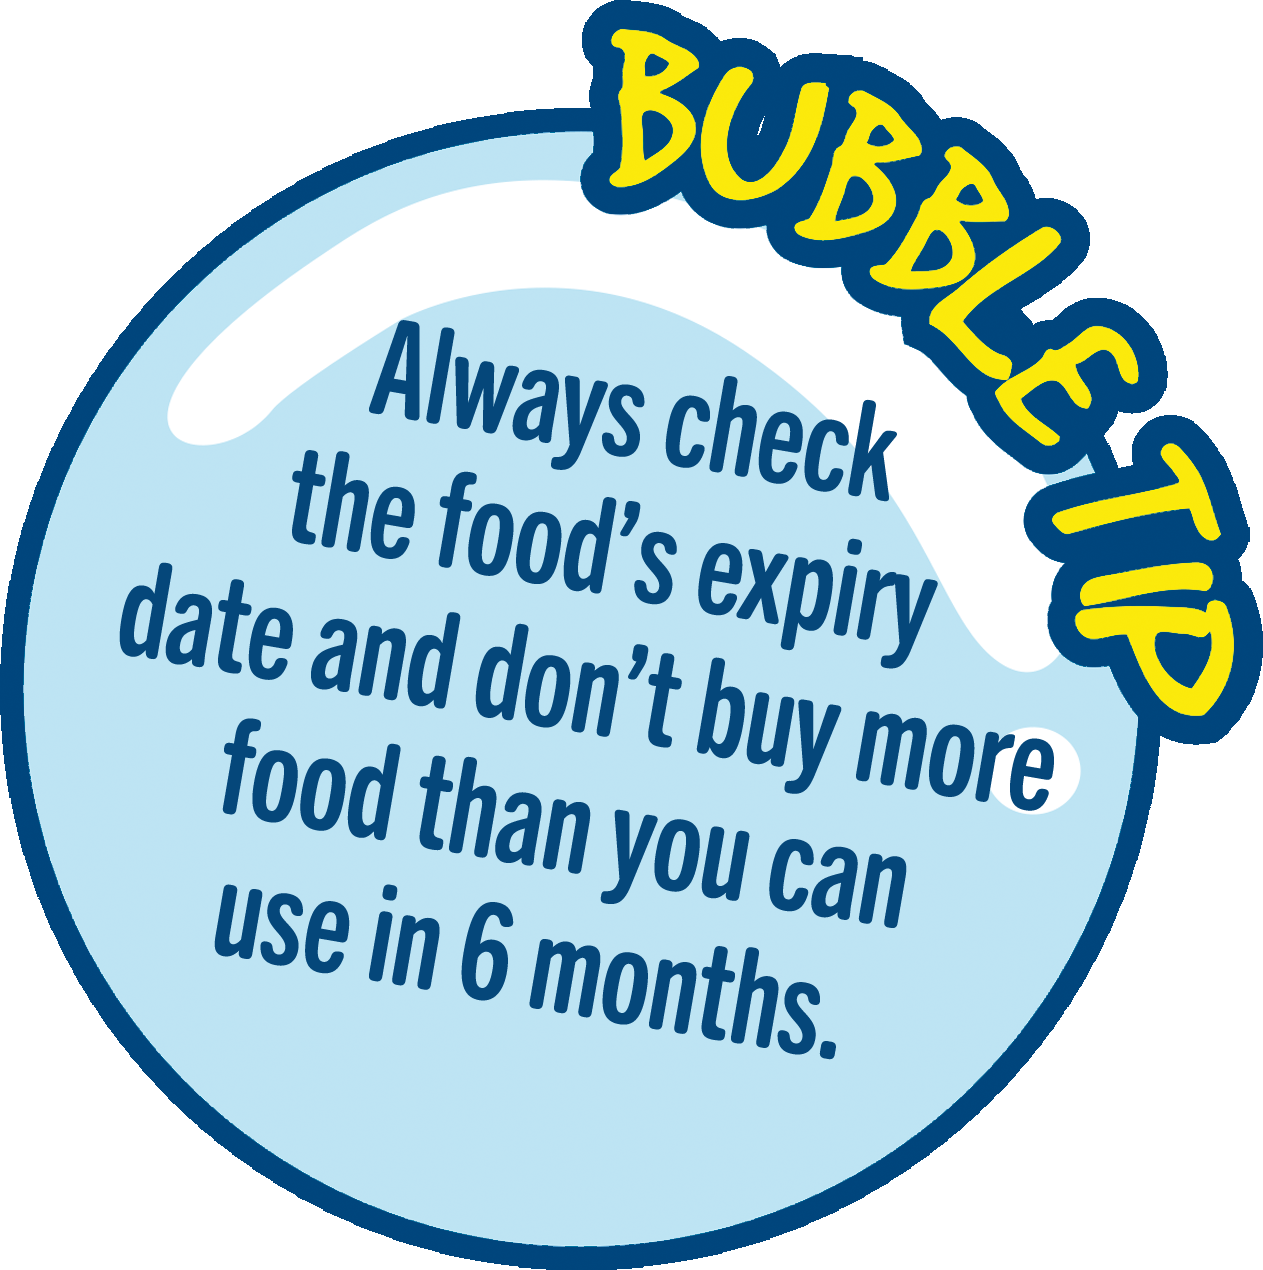 Always check the food’s expiry date and don’t buy more food than you can use in 6 months.